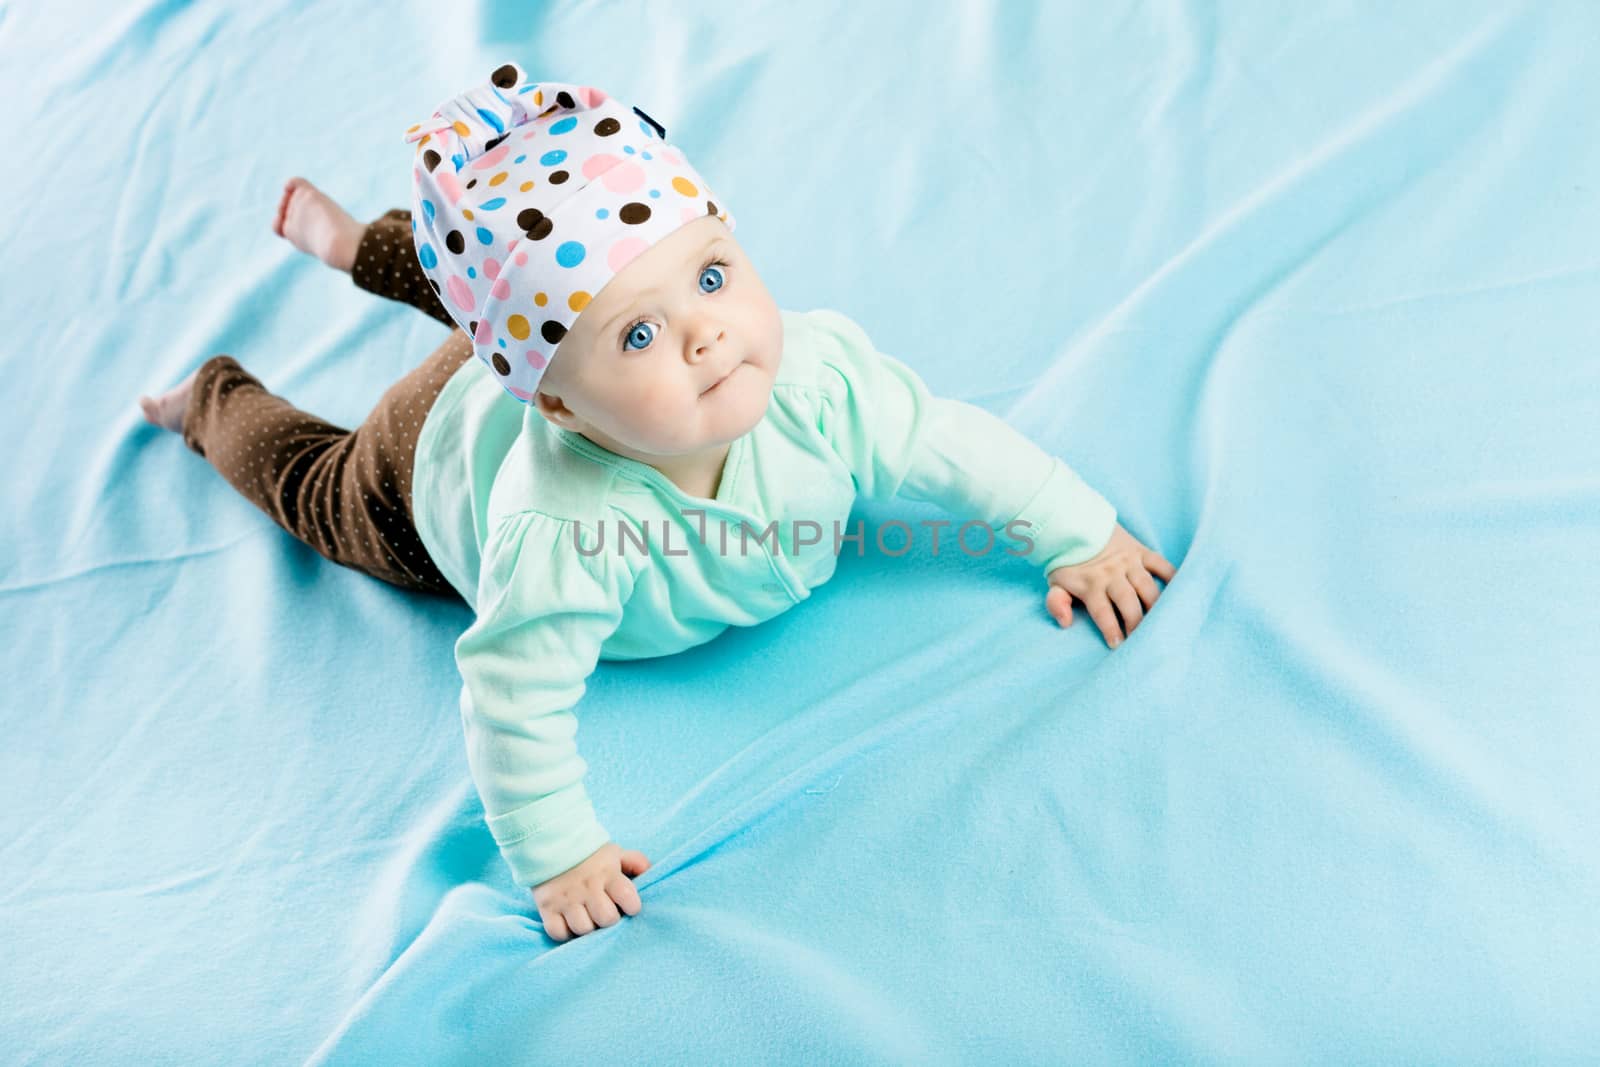 The blue-eyed baby in hat crawling on the blue coverlet